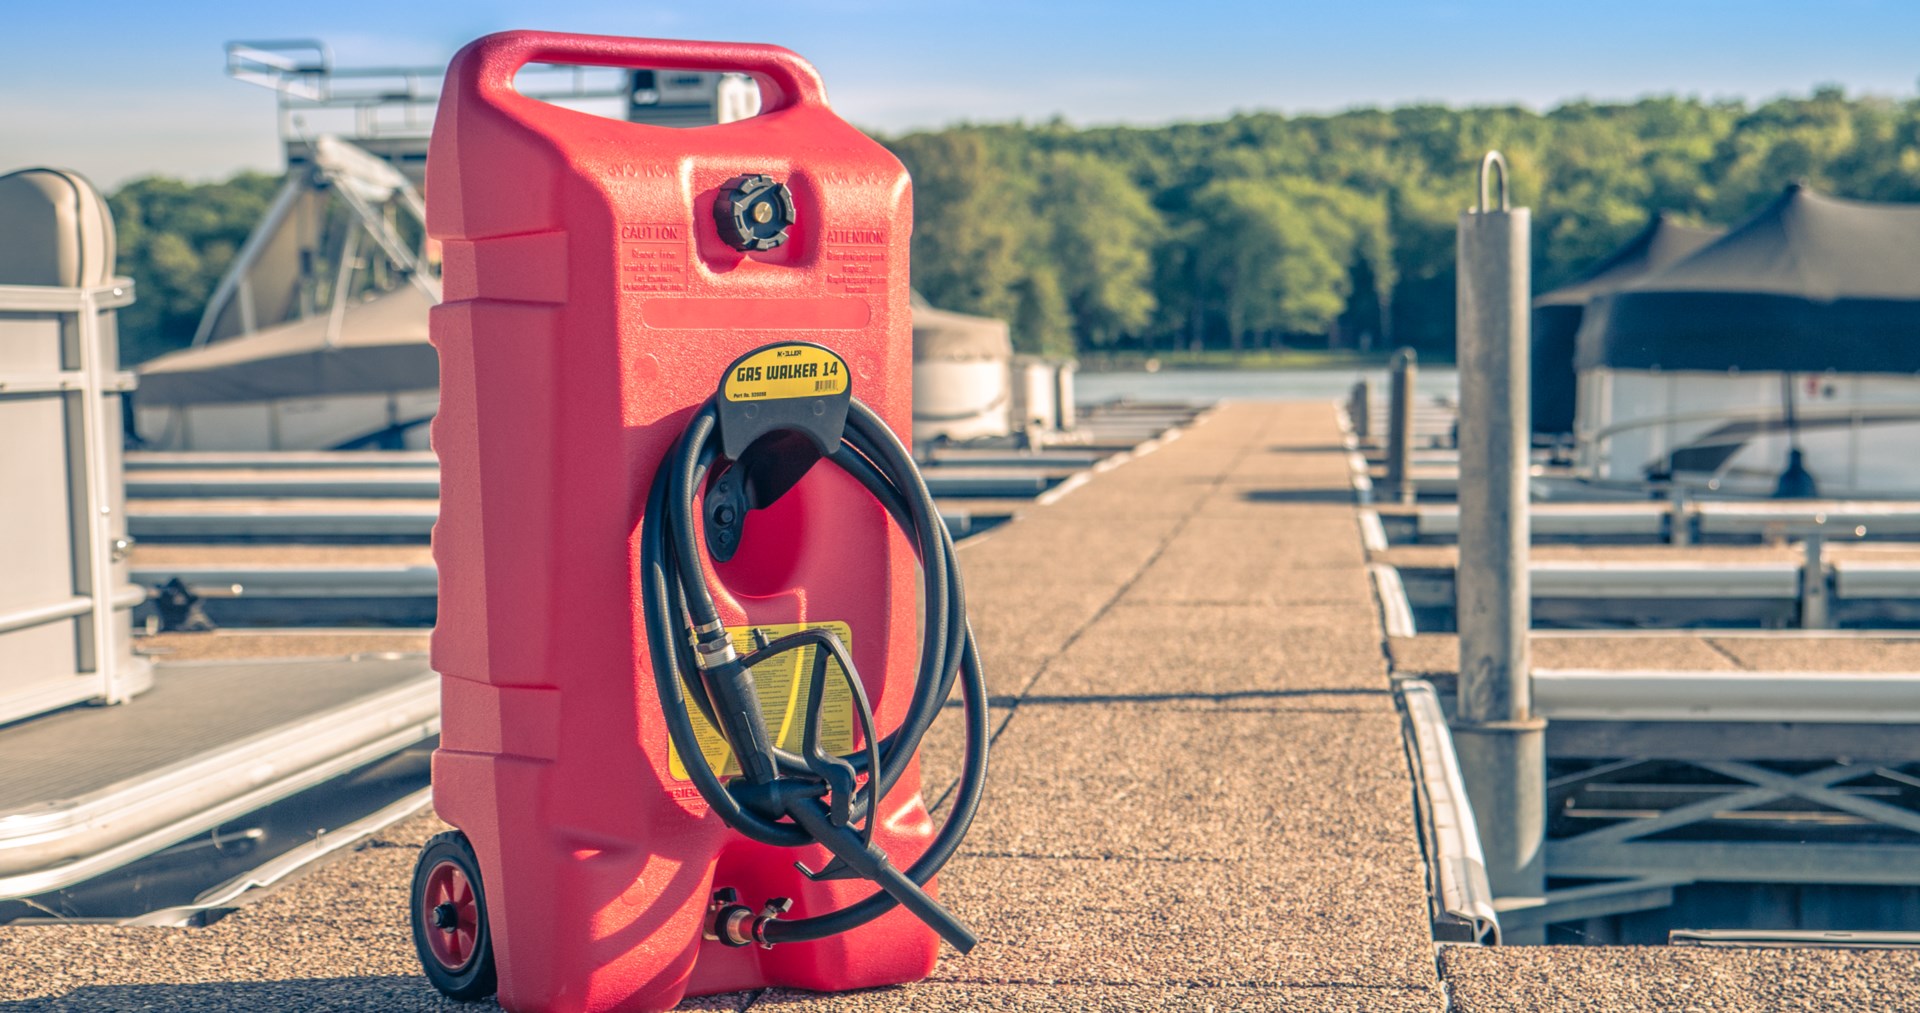 Sierra's red portable gas caddy standing upright on two wheels on a boat dock